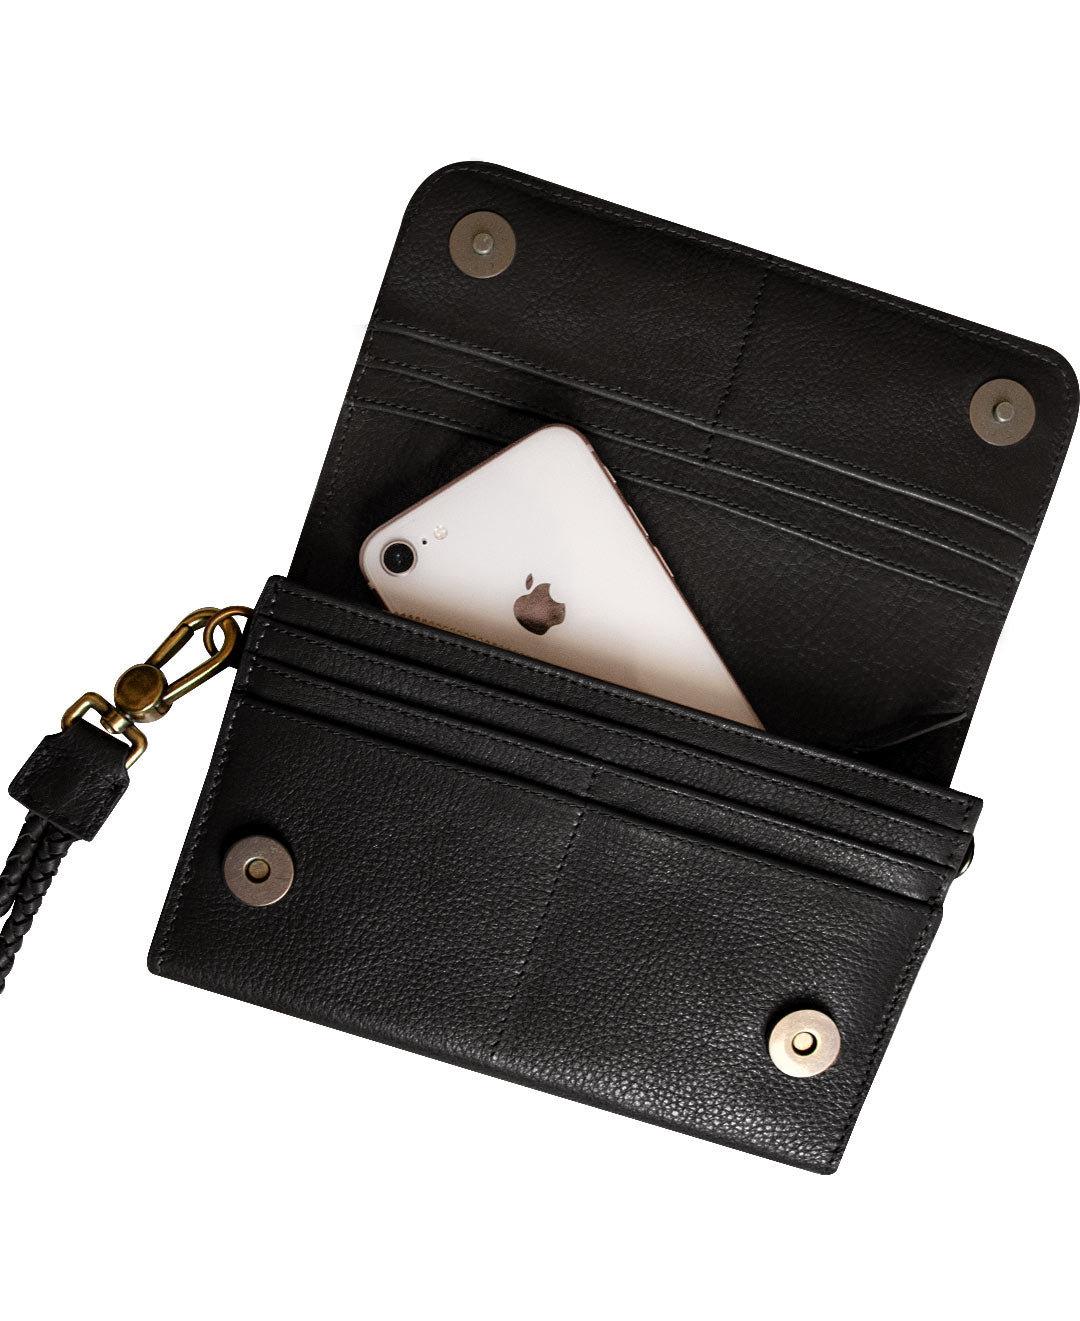 leather wristlet with strap